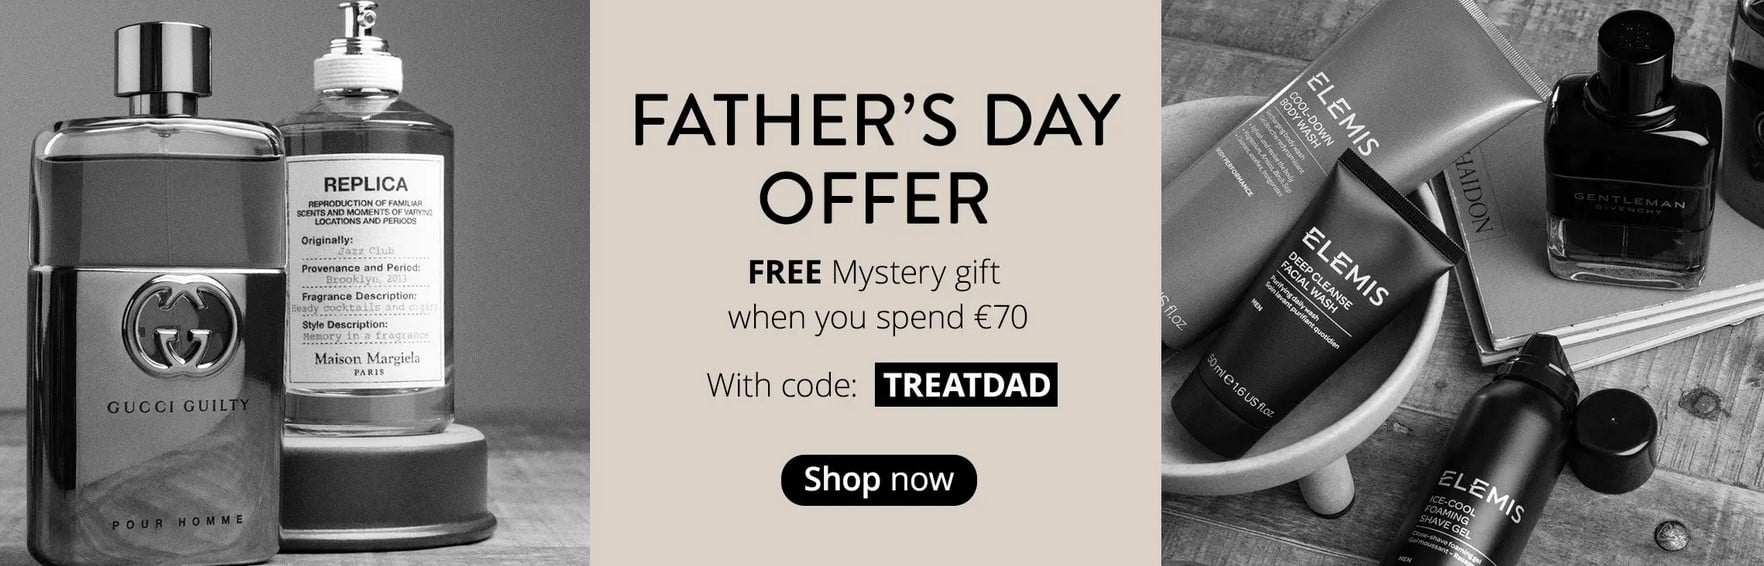 Free mystery gift when you spend €70 at Feelunique EU